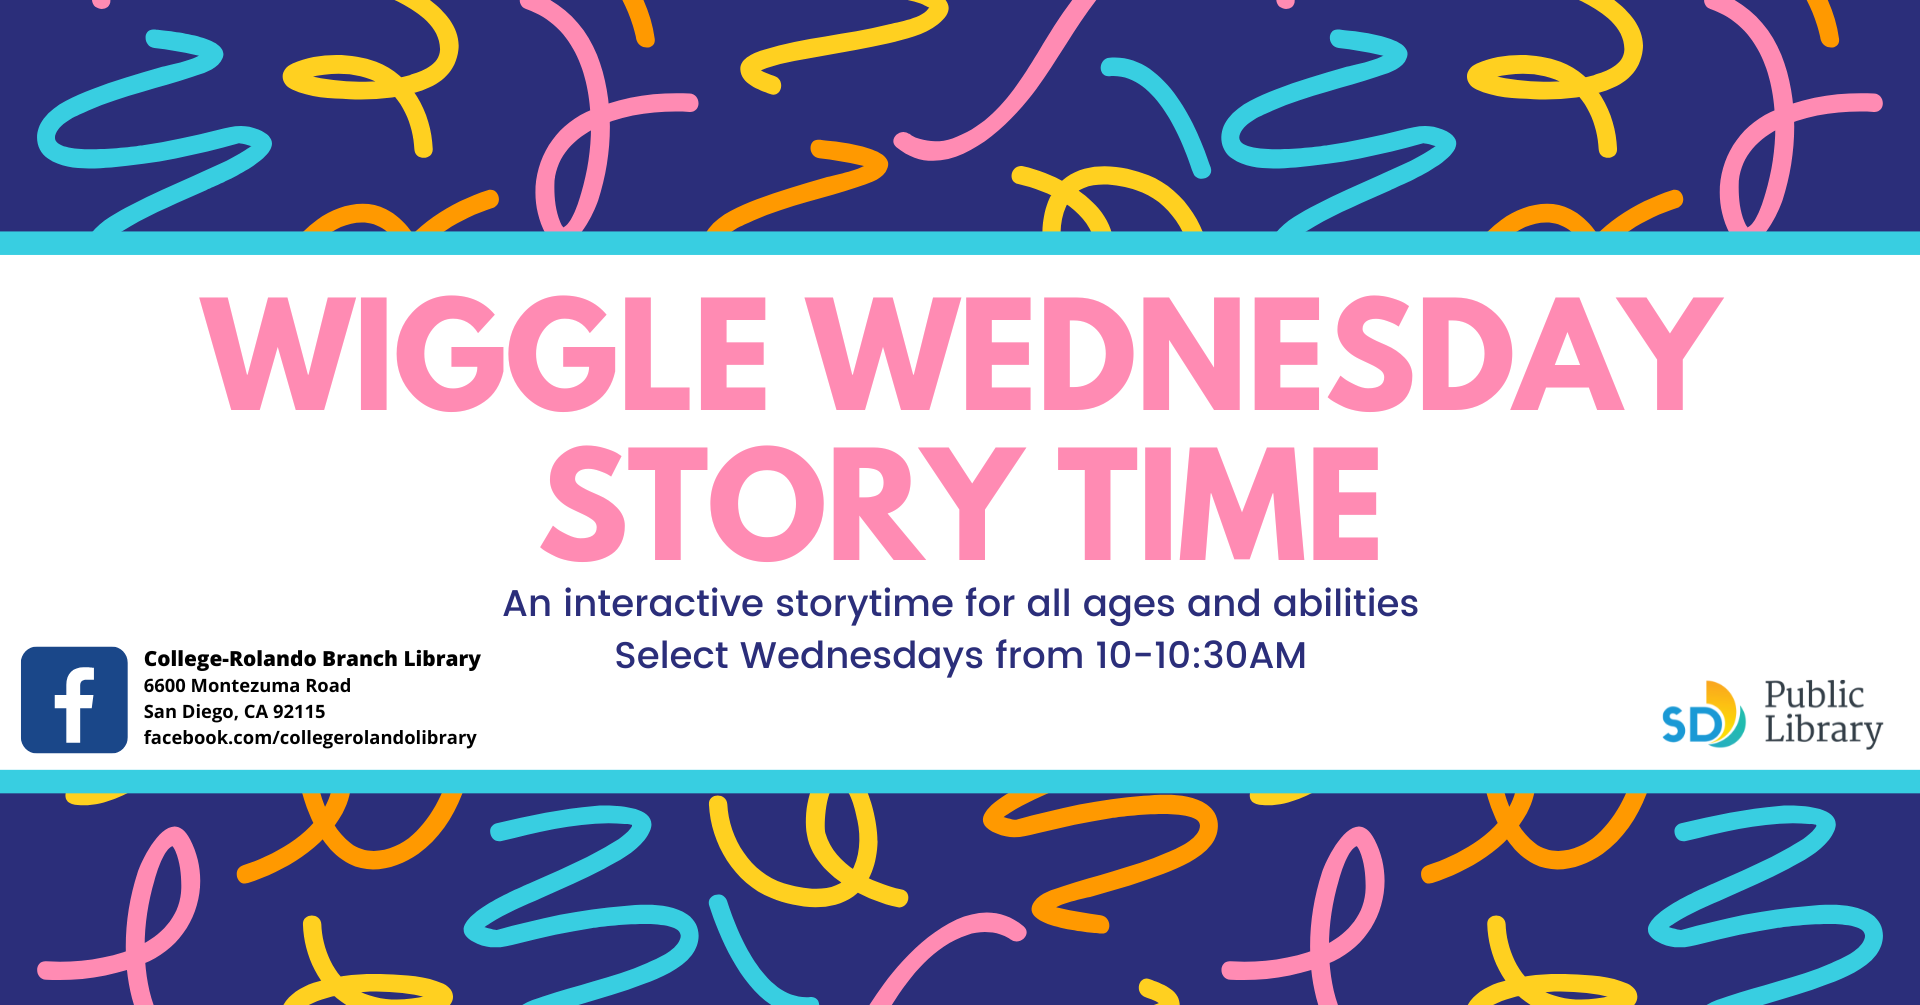  Wiggle Wednesday Storytime, Wednesdays at 10:00 a.m.      All Ages      Community Room, Join Ms. Jessica  for an interactive Storytime featuring books,  music, movement, and crafts to encourage Early Literacy skills. 